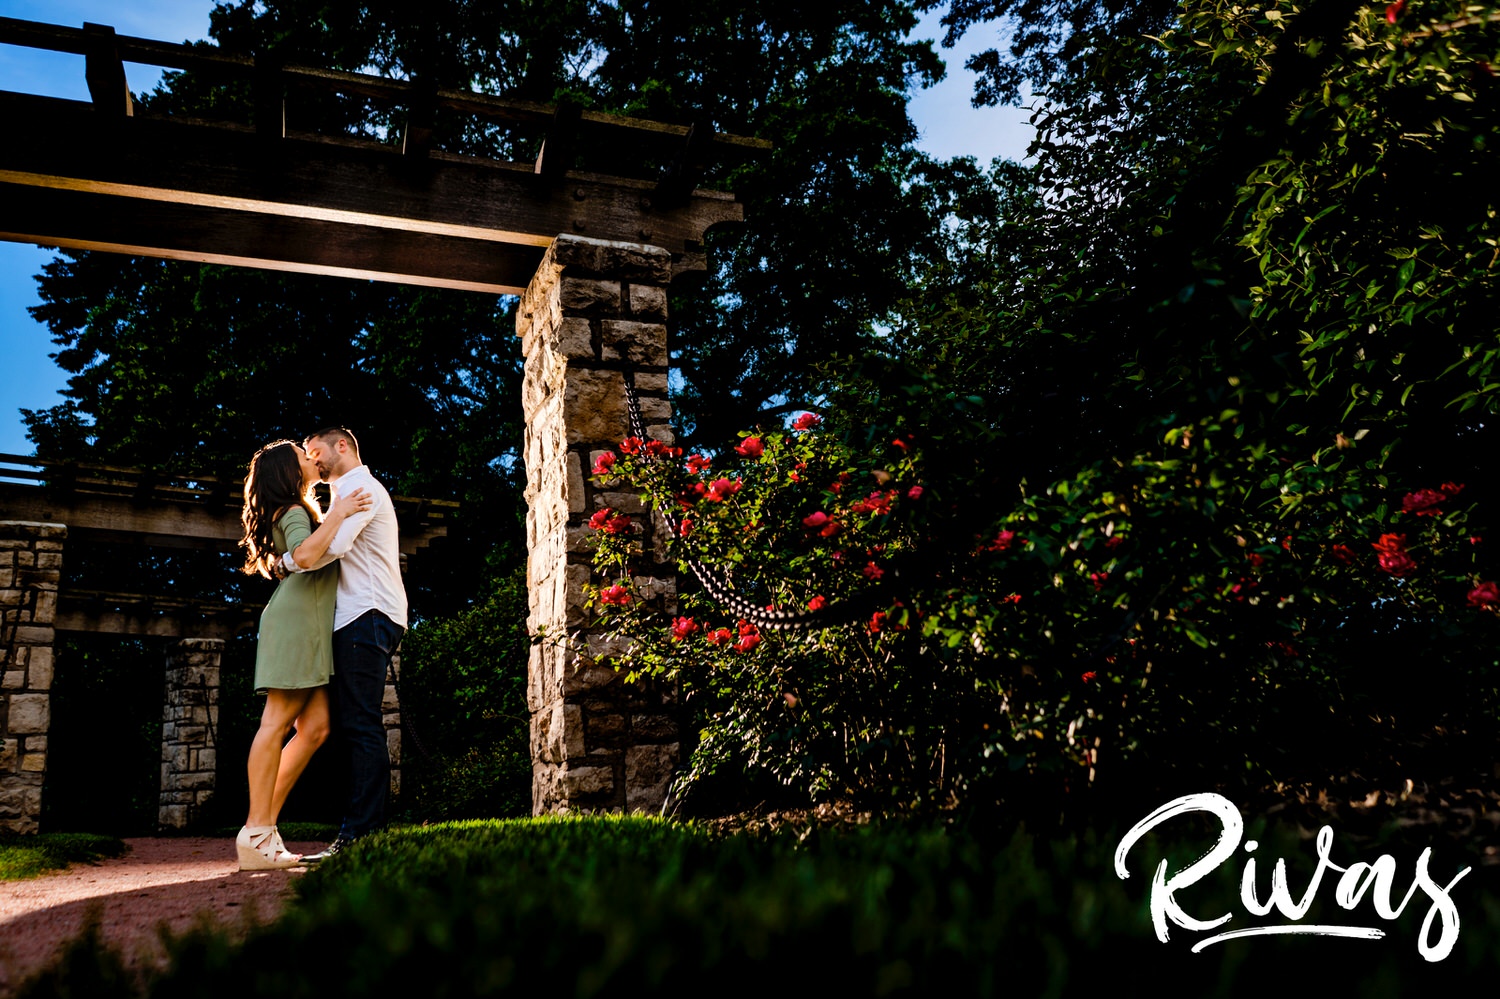 A colorful portrait of an engaged couple sharing and embrace and kissing underneath the stone arbor in Kansas City's Loose Park Rose Garden.